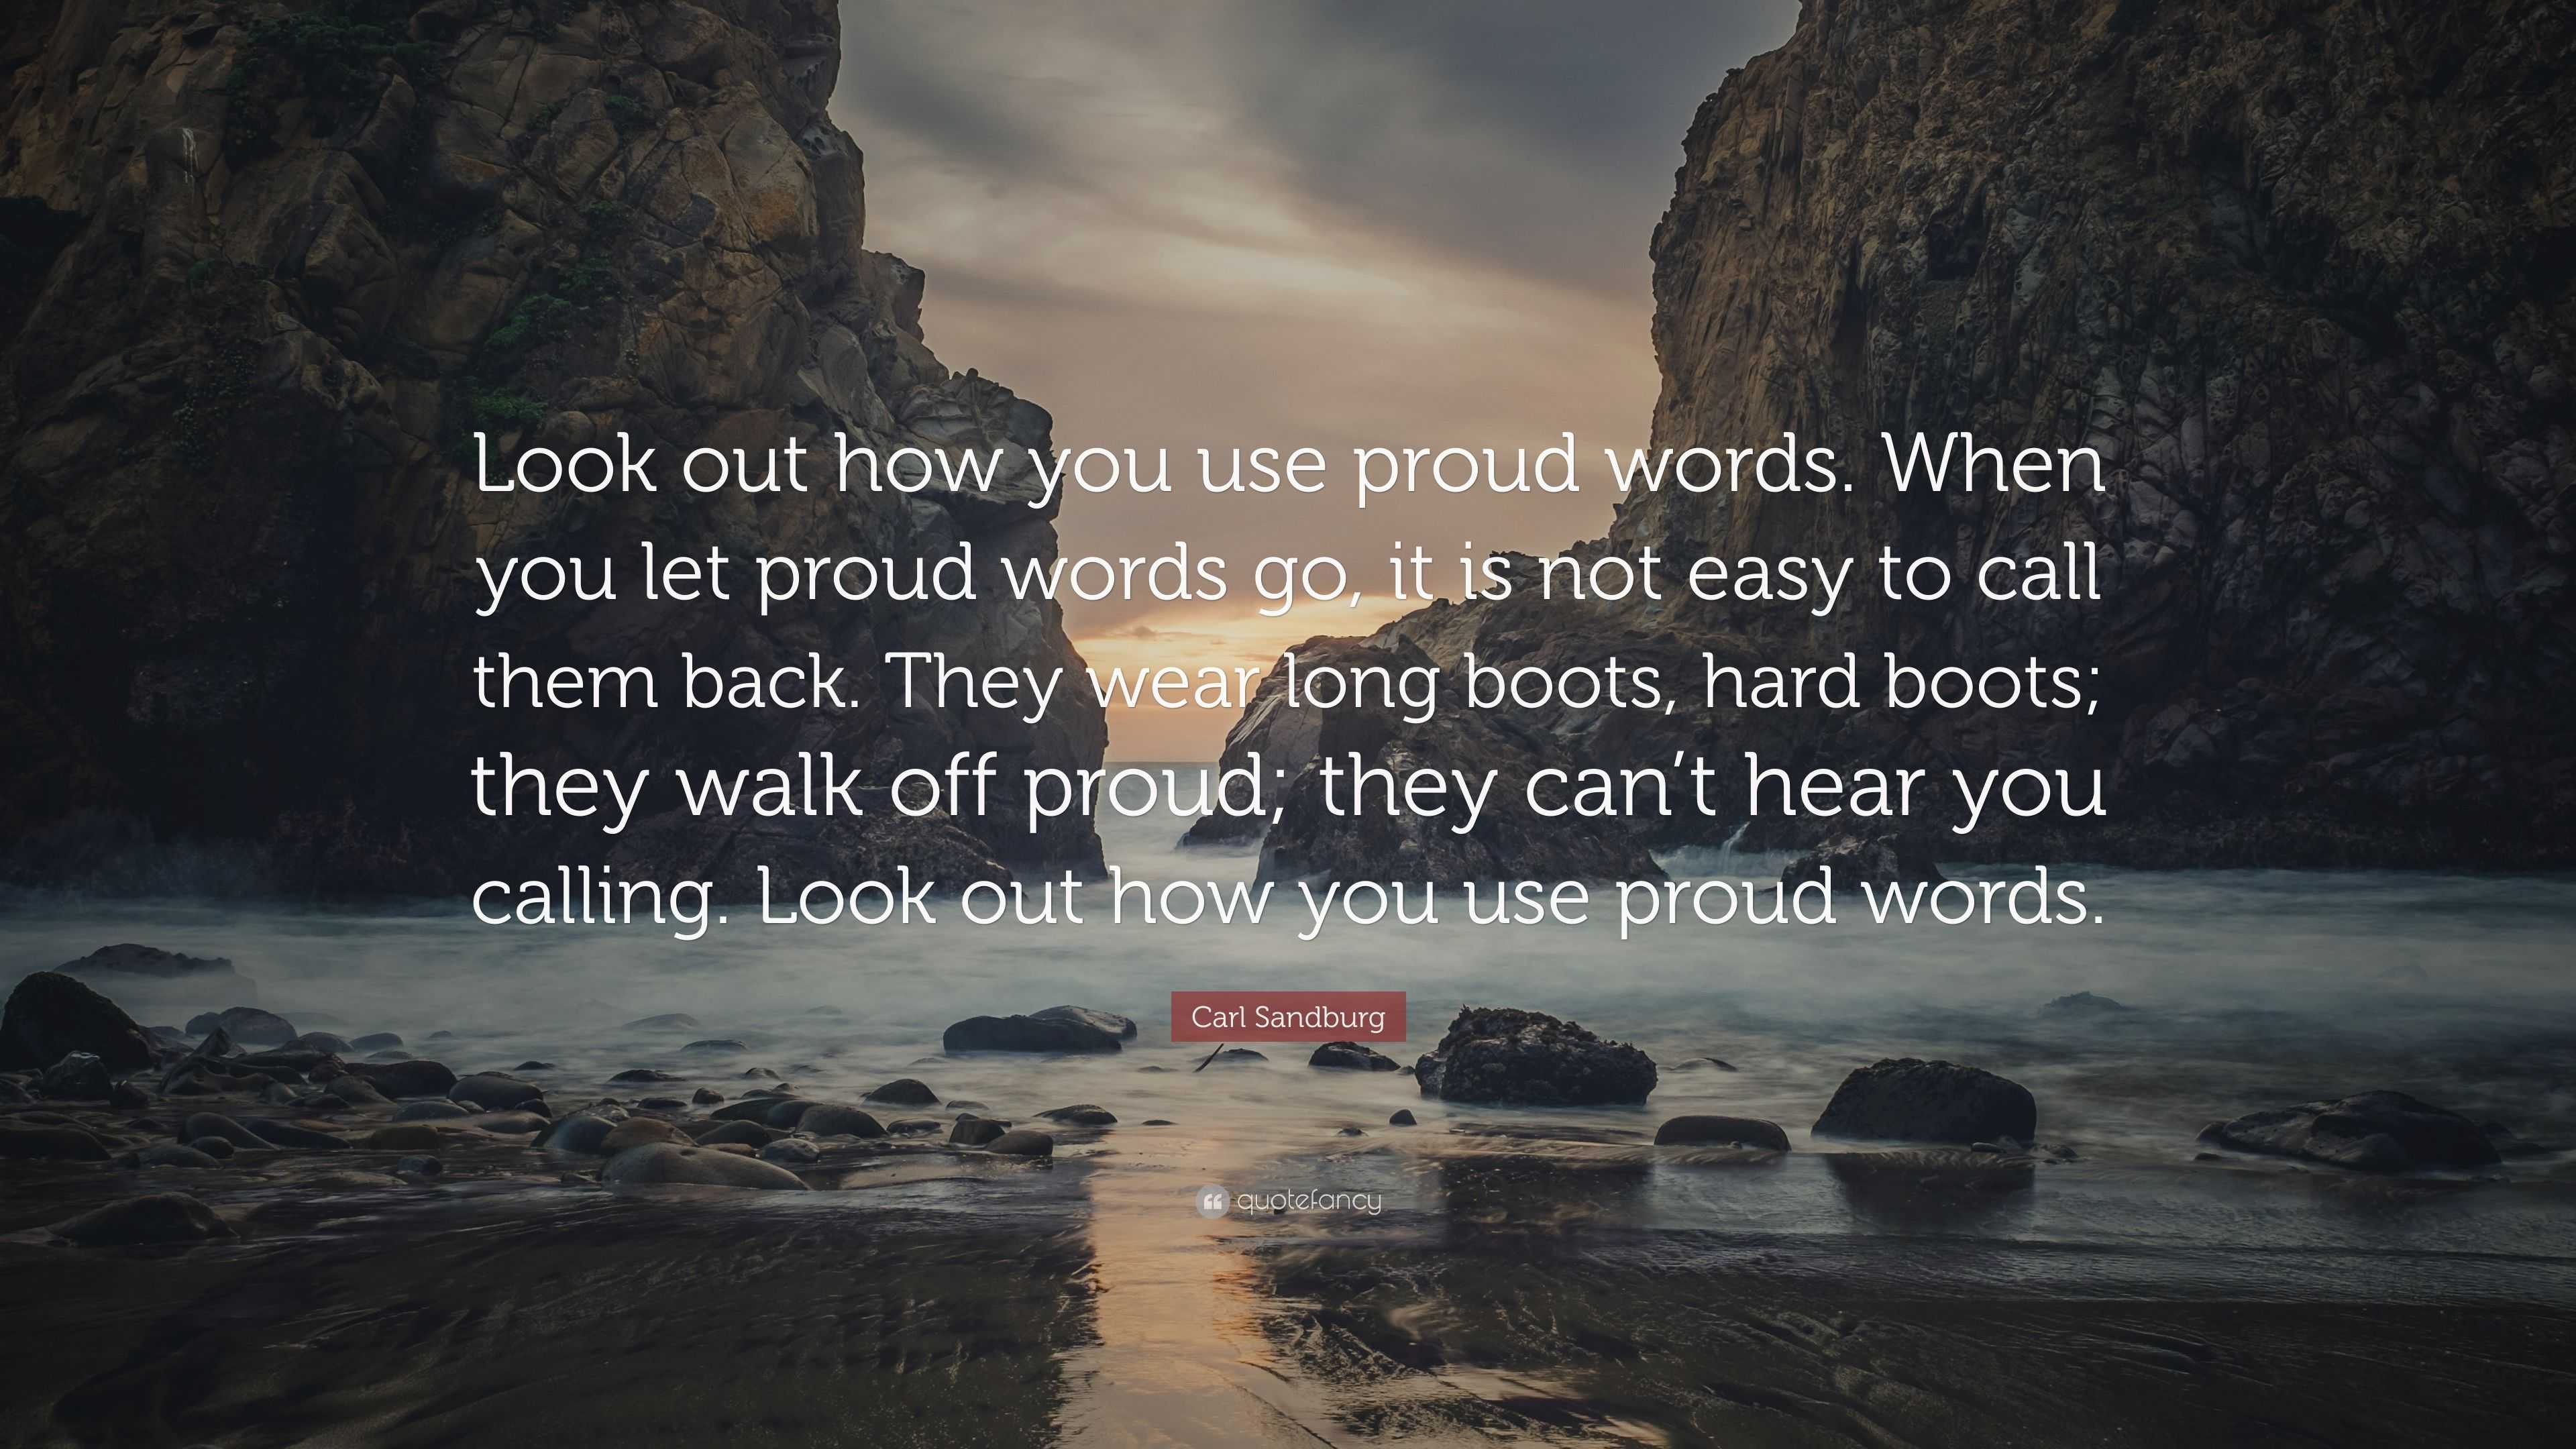 Carl Sandburg Quote: "Look out how you use proud words ...